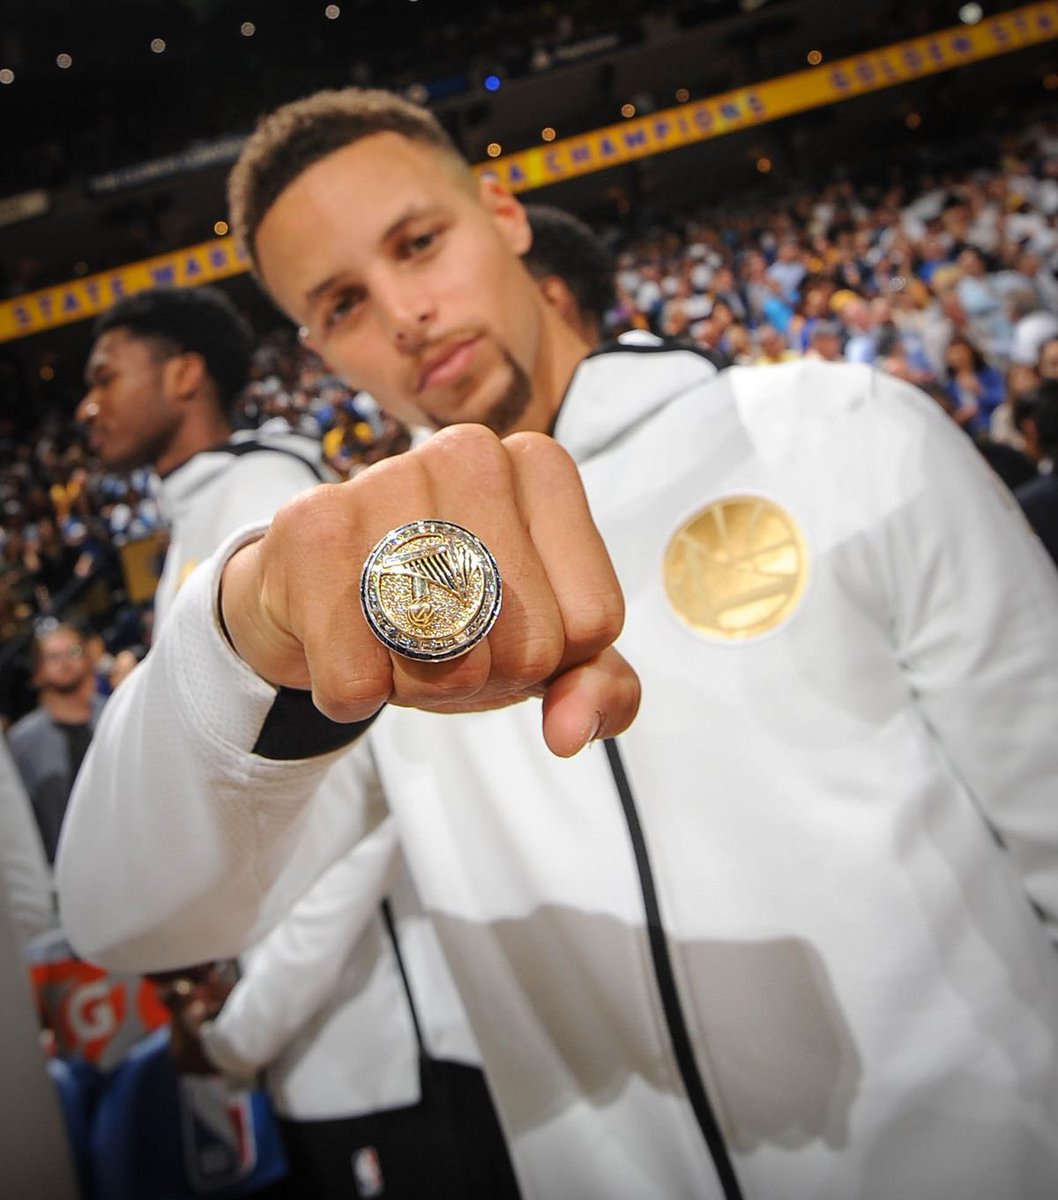 Golden State Warriors on Twitter "💍 It's Replica Ring Night on 